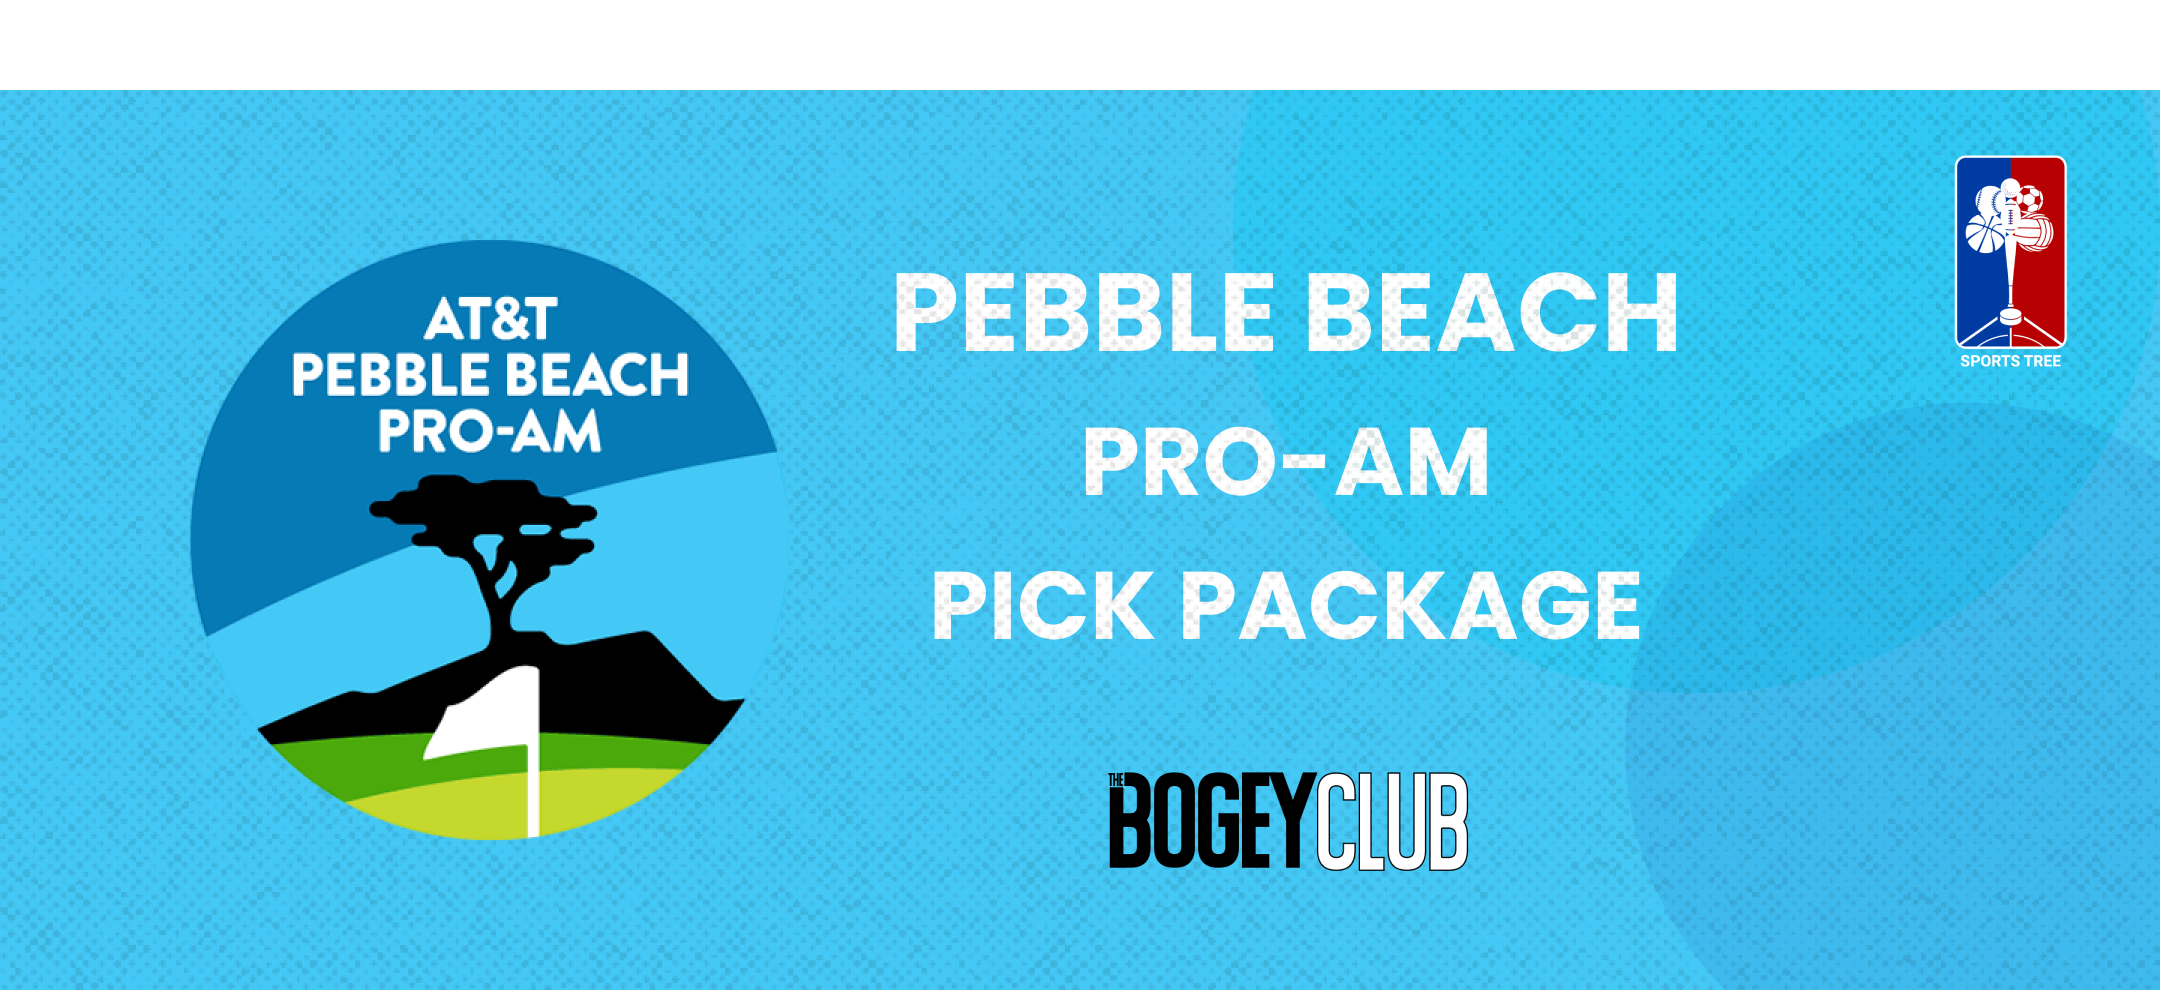 Sports Tree Pick Pebble Beach Pro-Am: Preview, Picks and Best Bets - Presented By: The Bogey Club